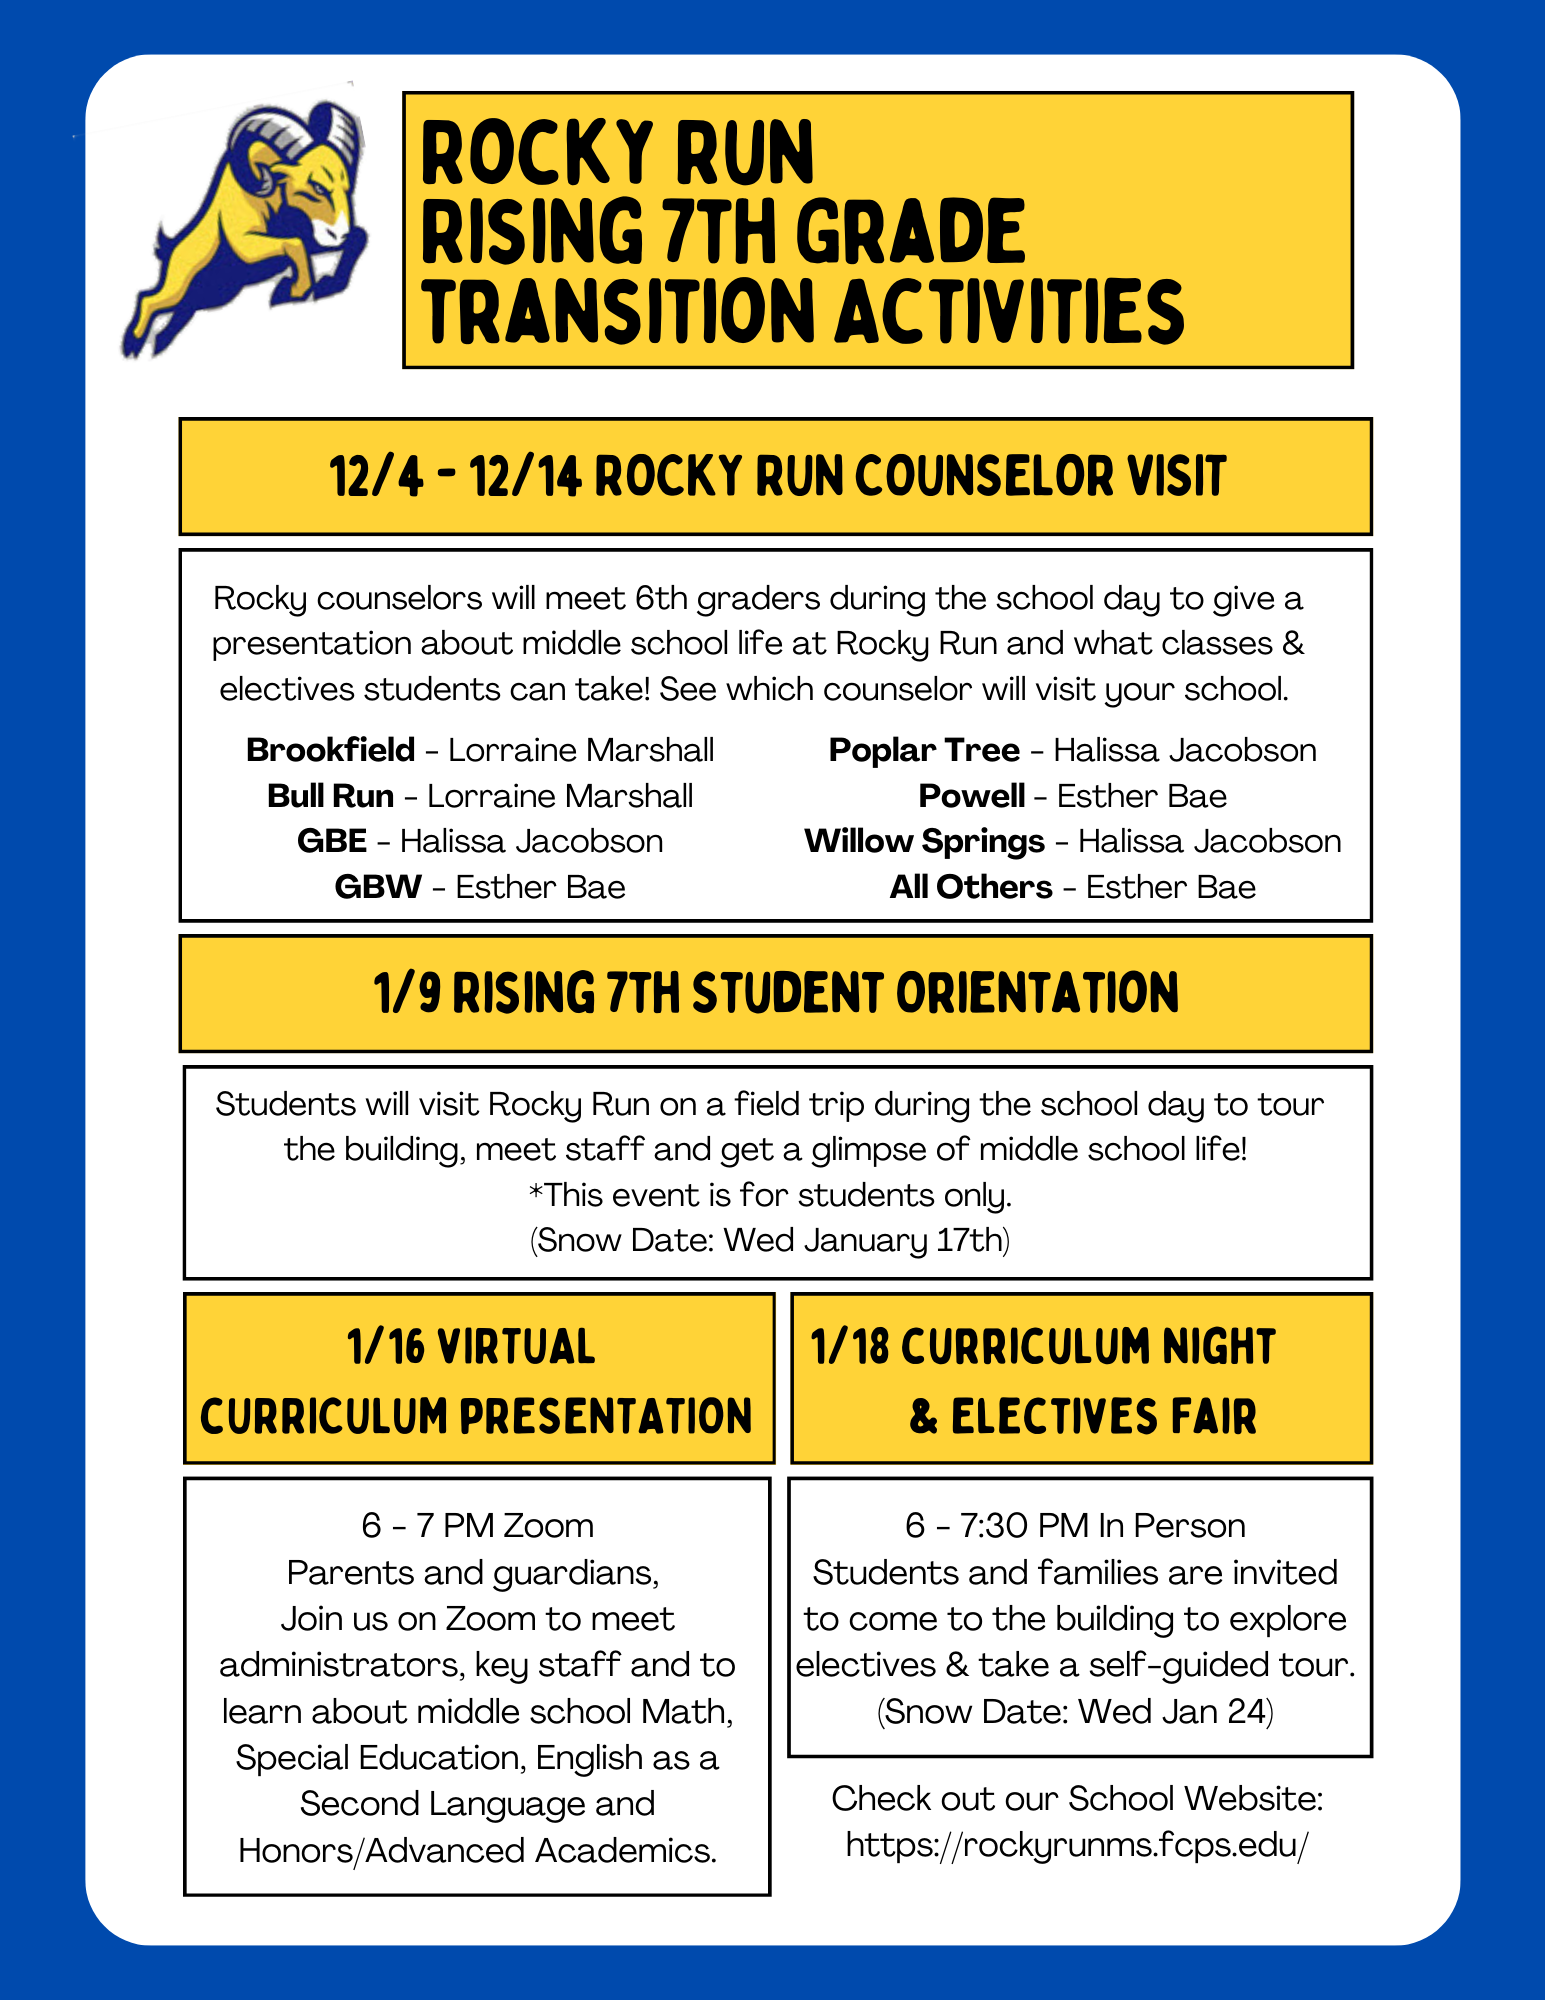 RR R7 Transition Activities